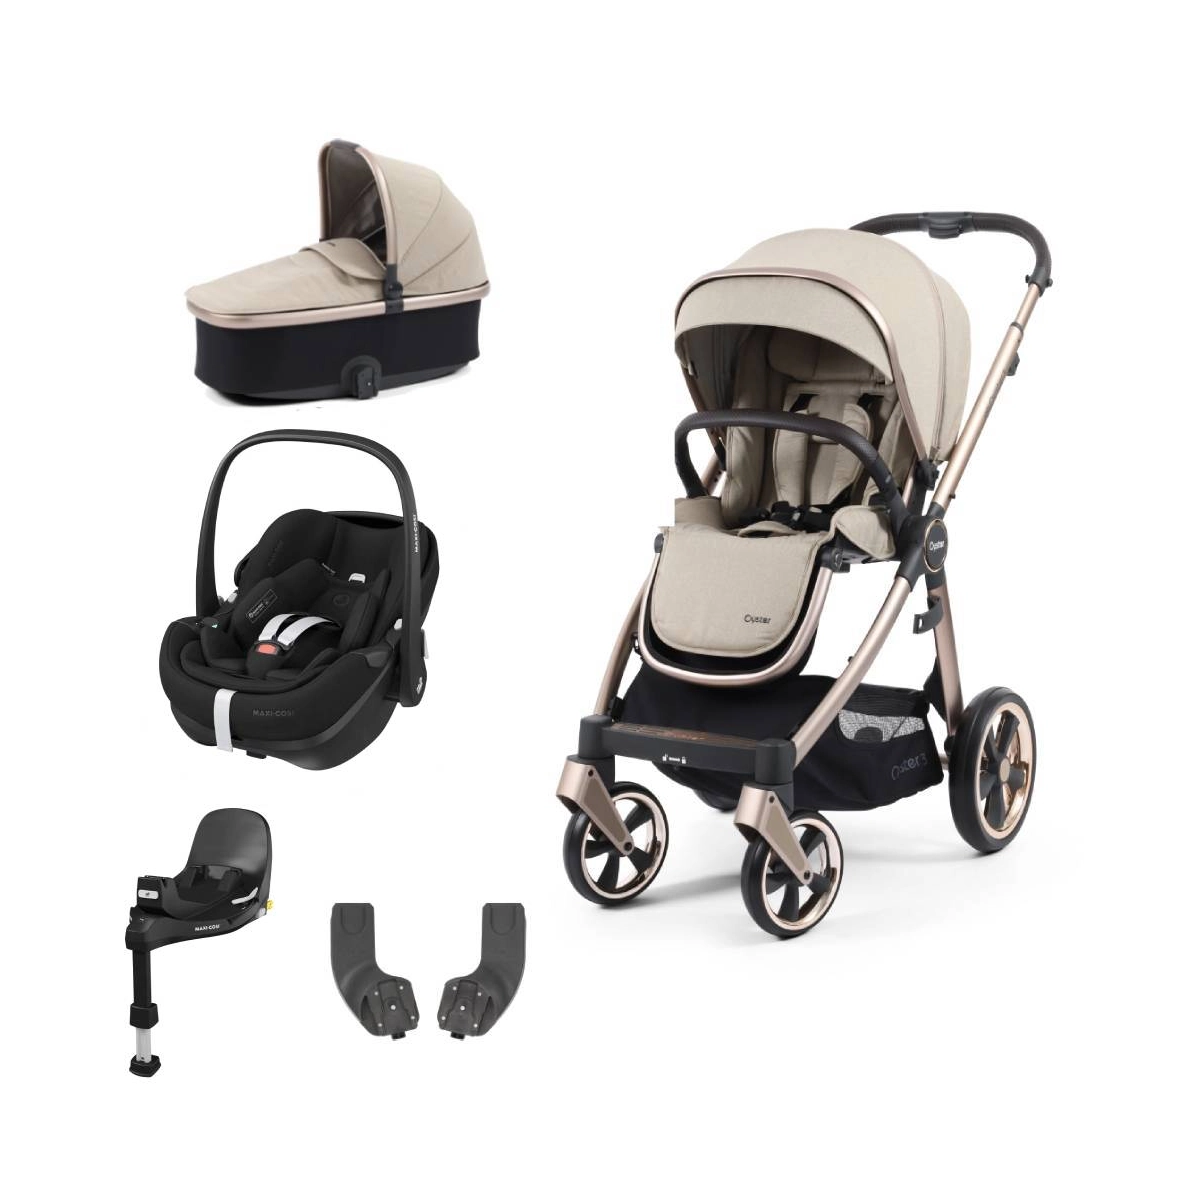 BabyStyle Oyster 3 Champagne Chassis Essential 5 Piece Bundle with Maxi Cosi Pebble 360 Pro Car Seat & Base